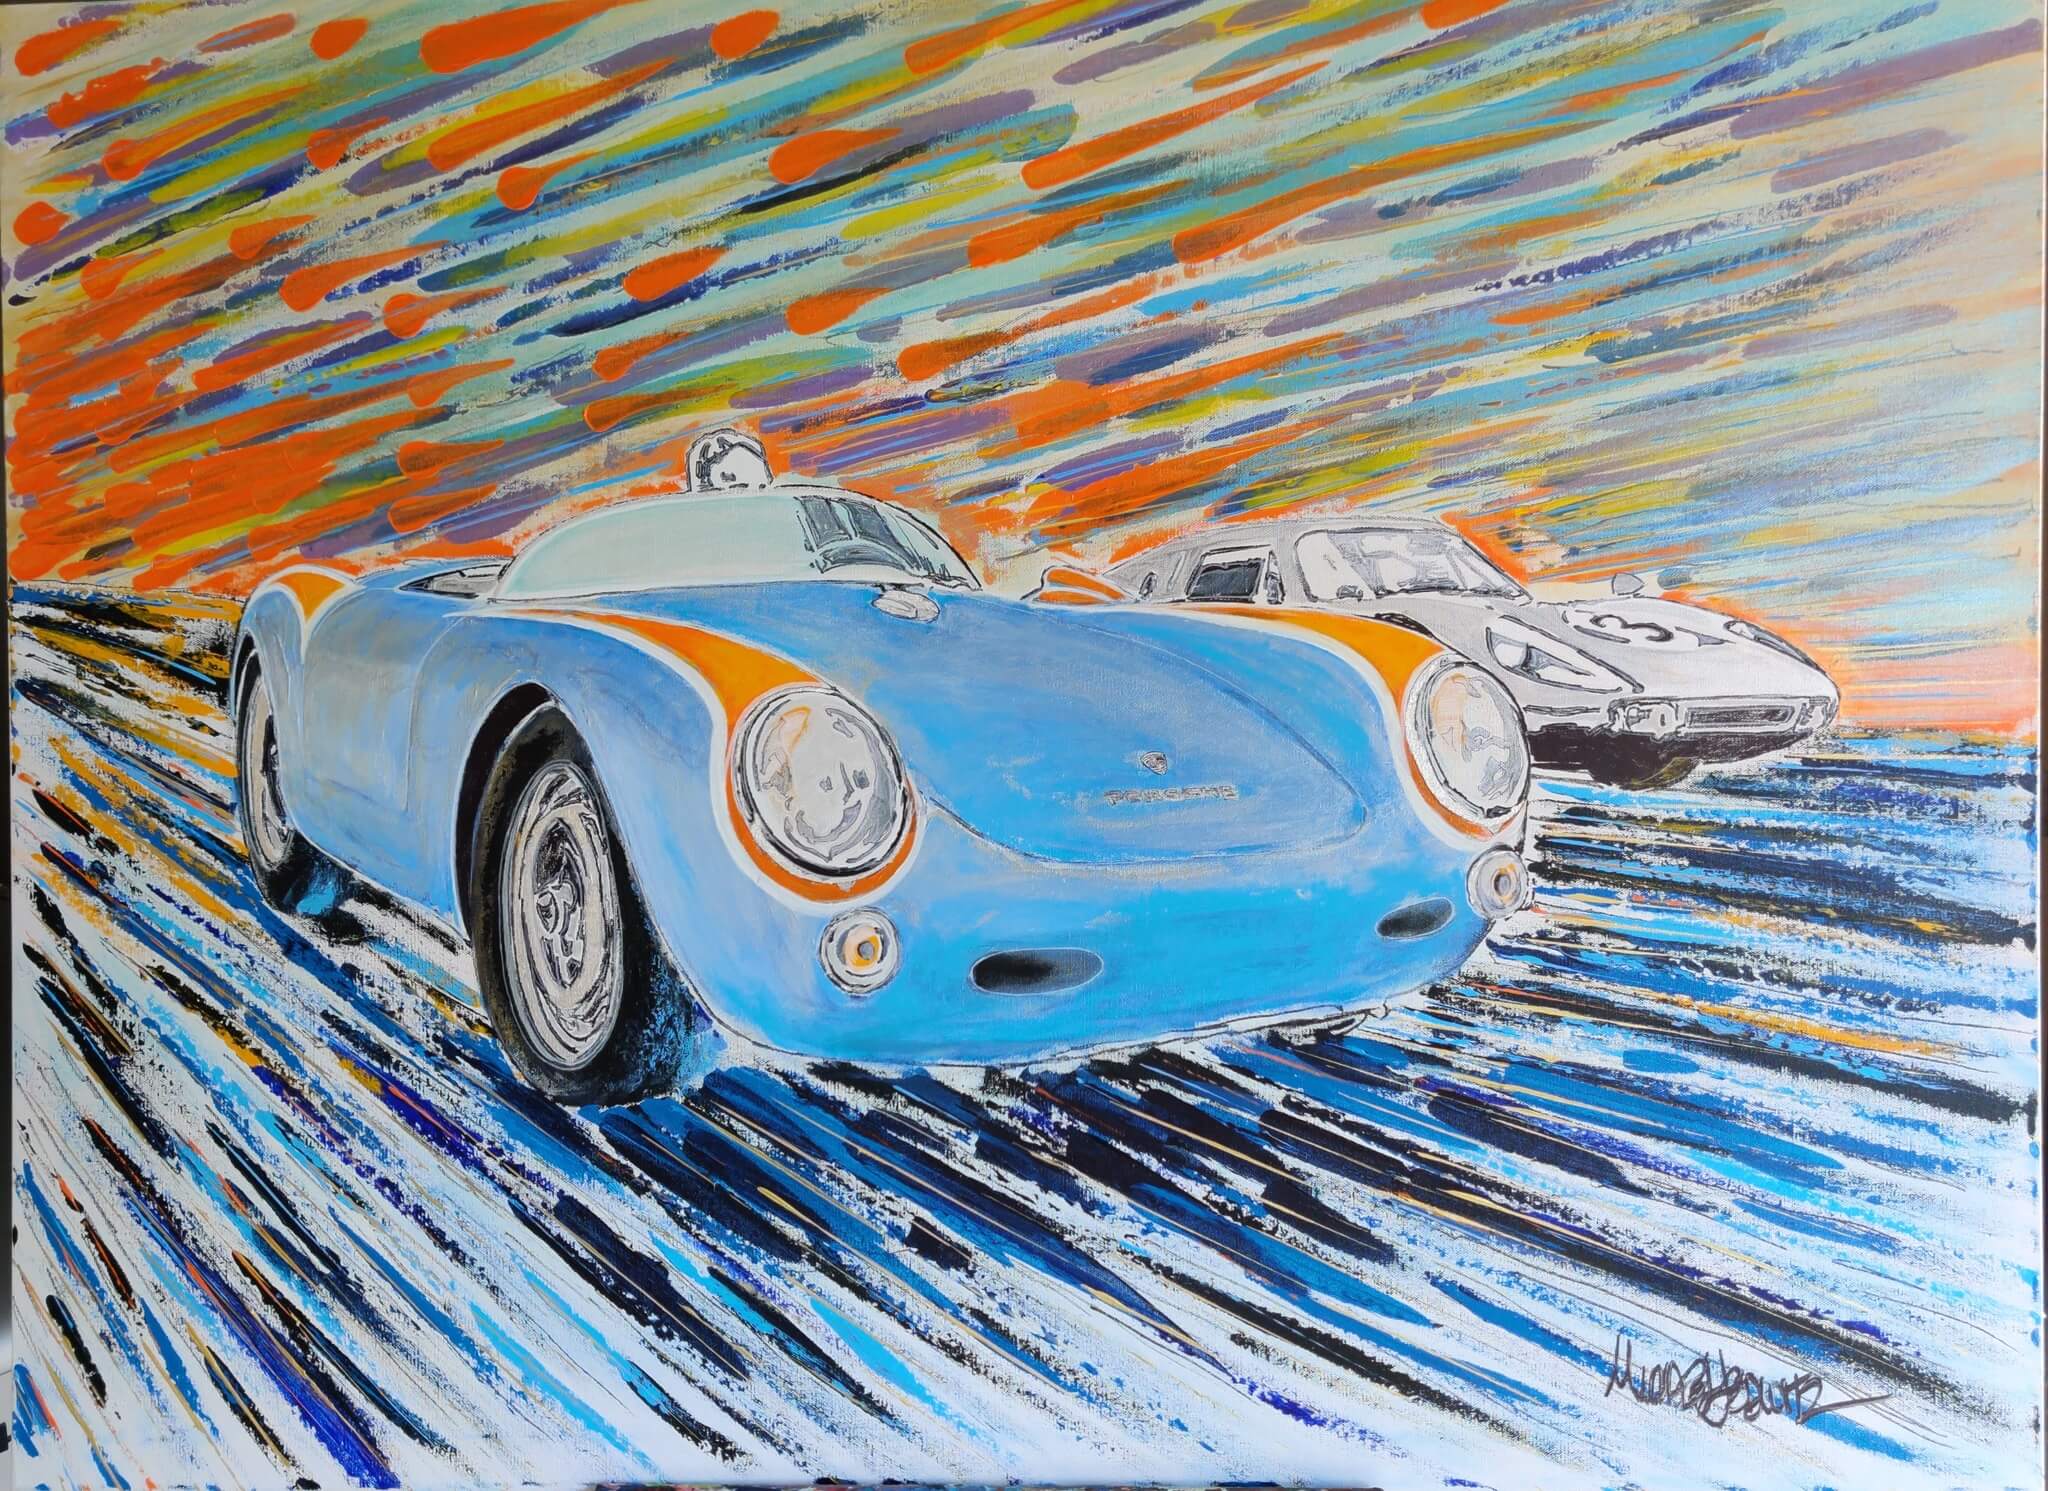 "I'll Race You Home" Painting by Michael Ledwitz